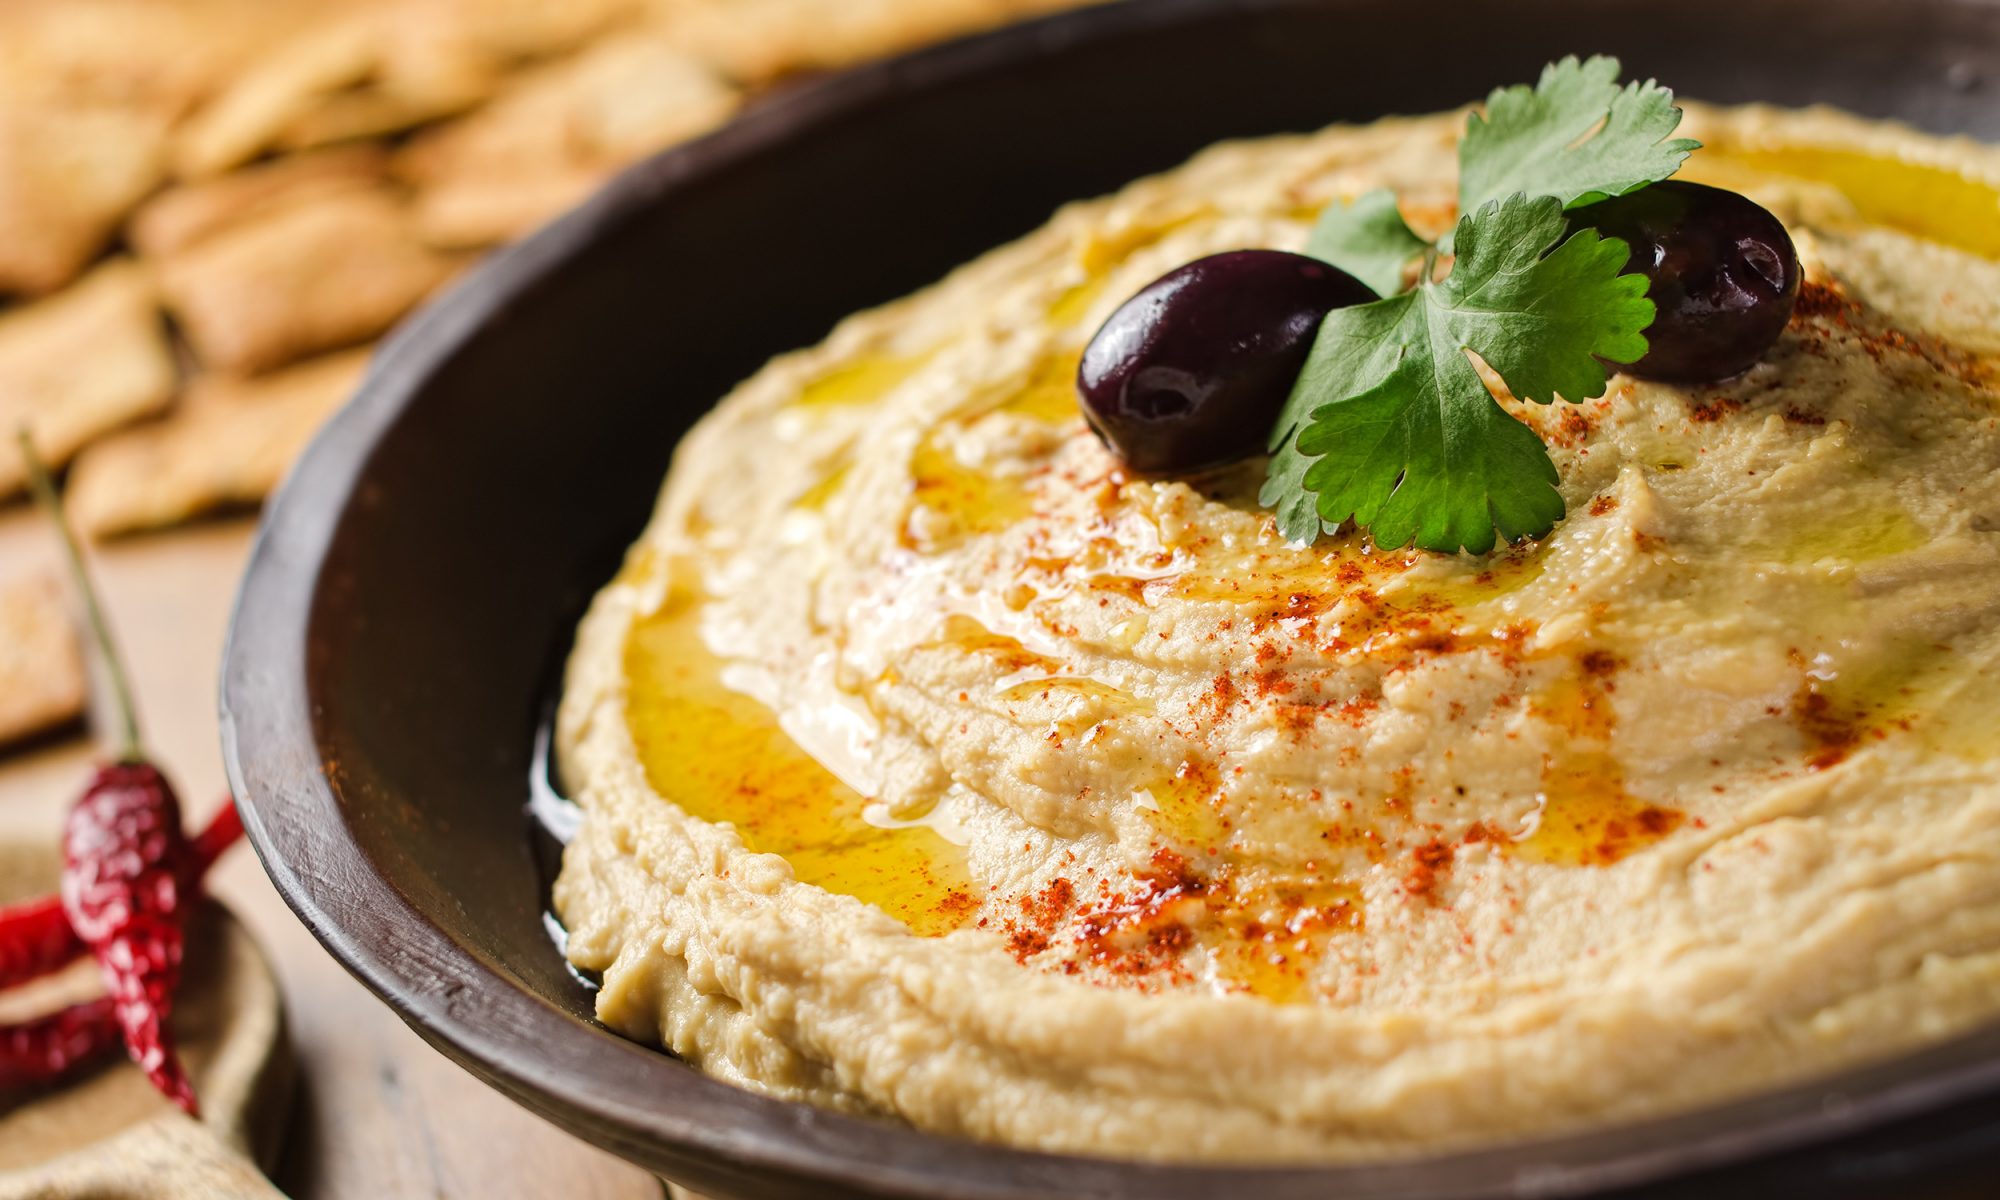 EC: Hummus Is a Simple Food with a Complicated Identity